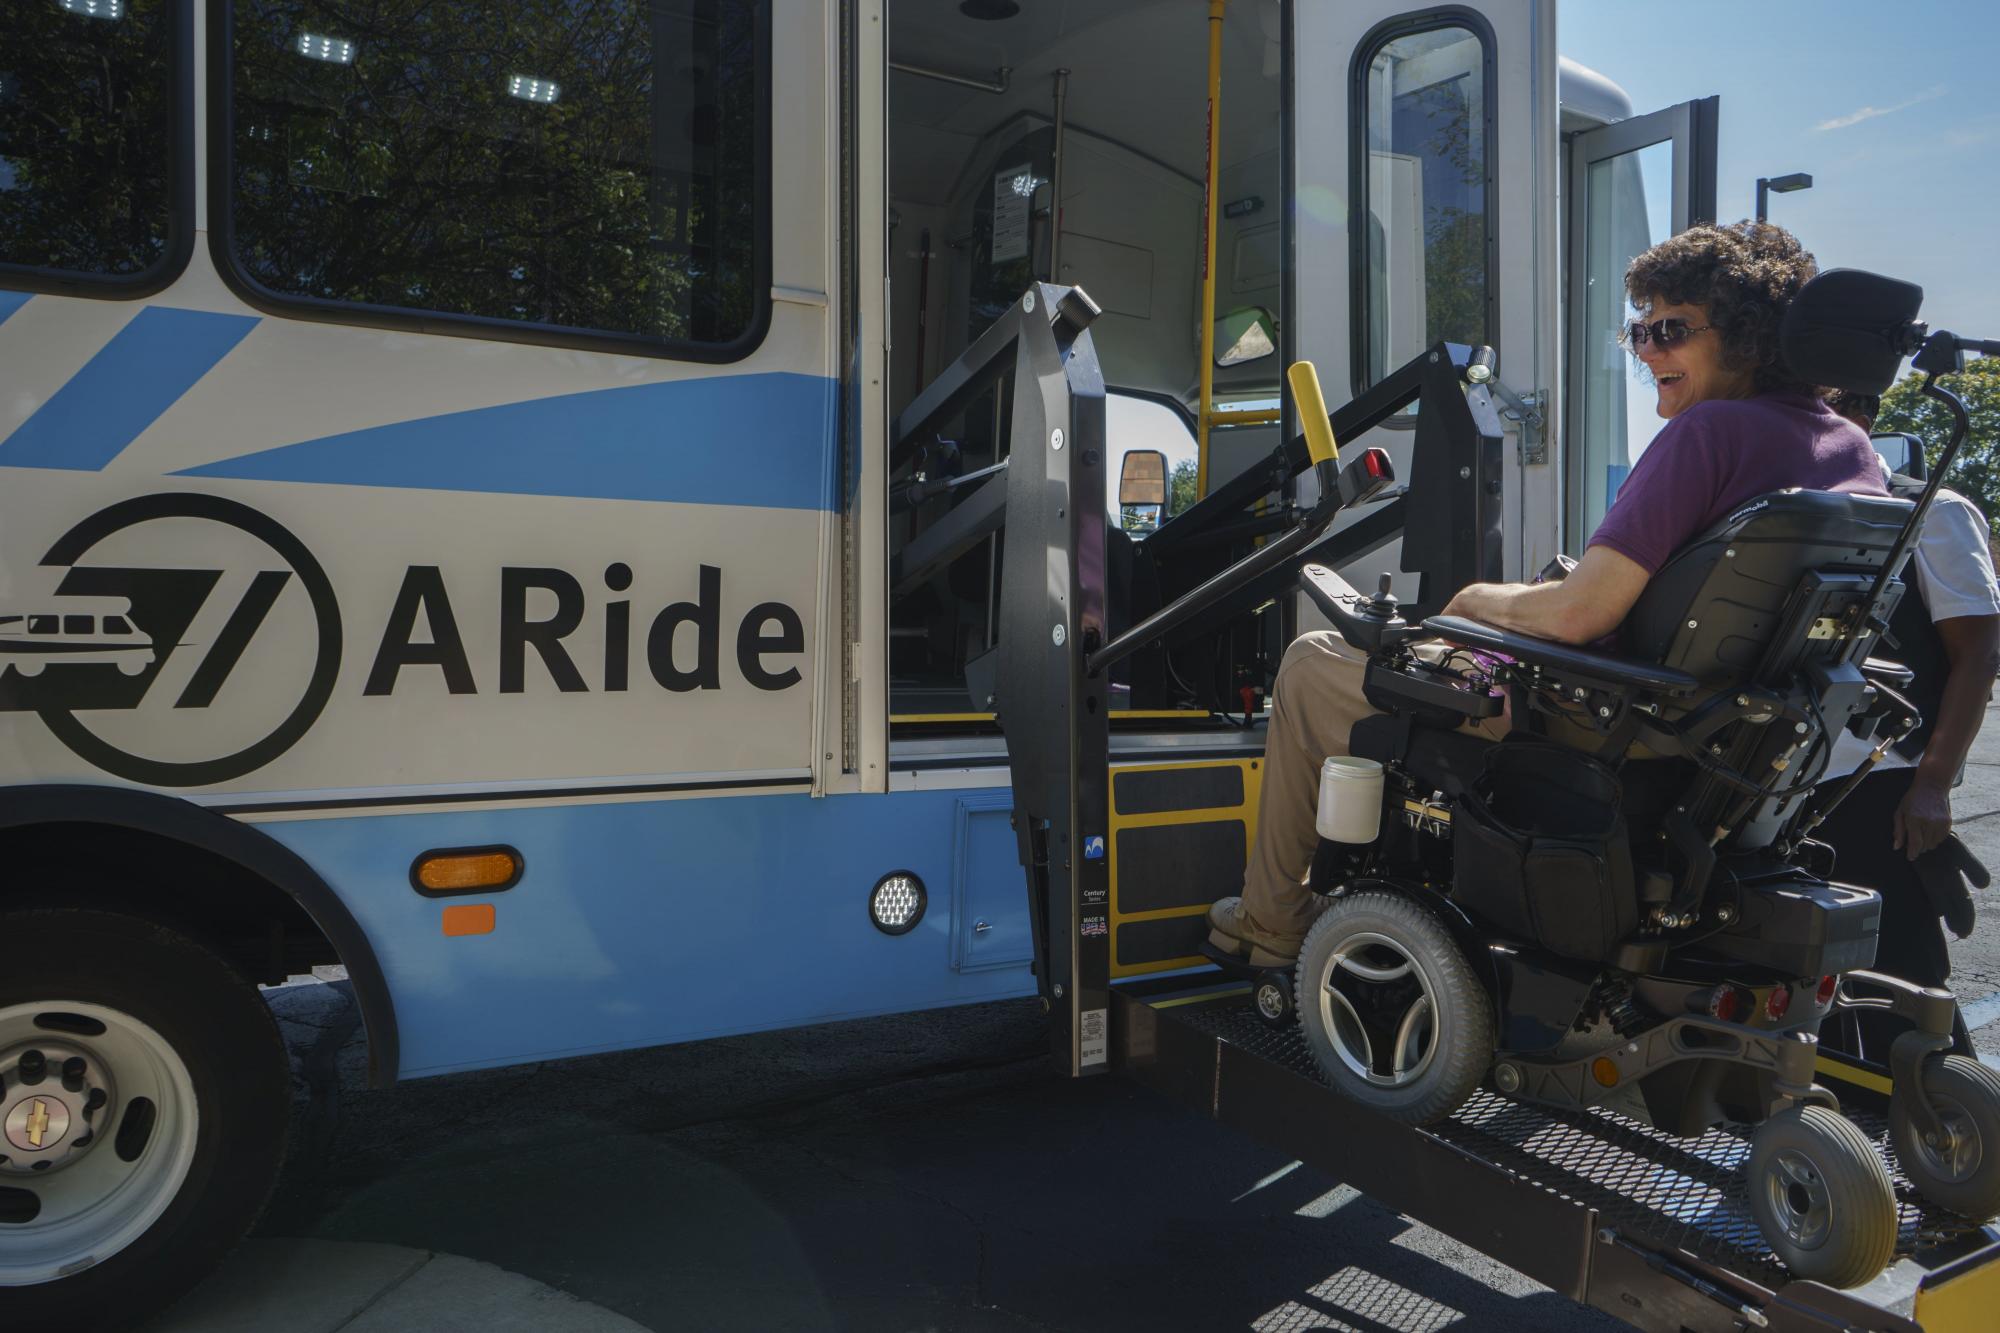 A passenger in a wheelchair is lifted up to ride on the A-Ride bus.